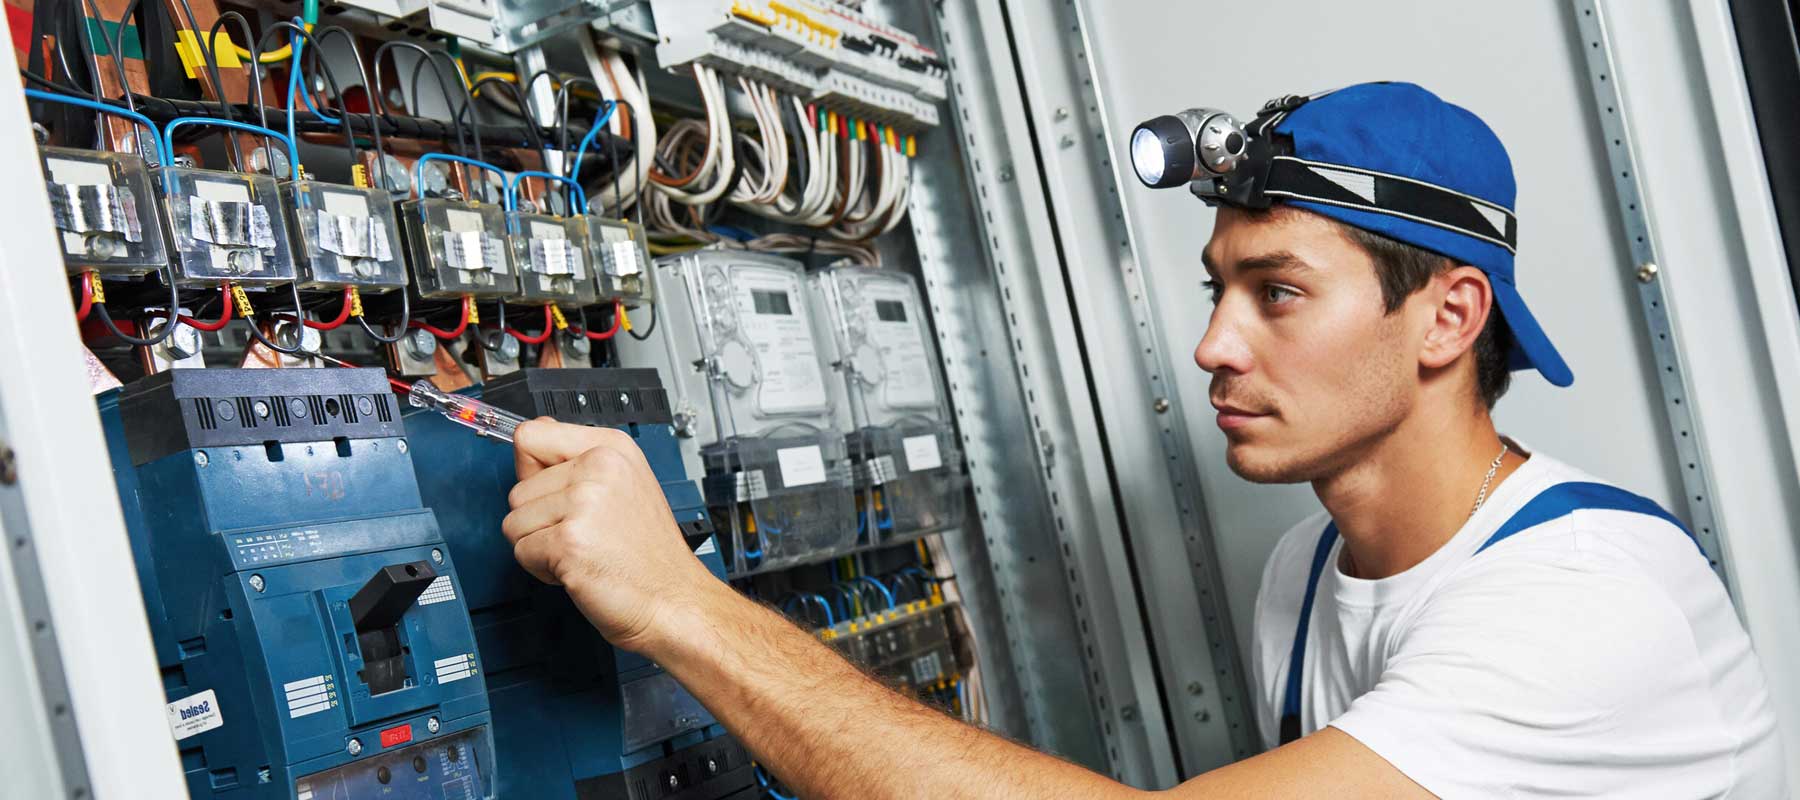 Man Working on Electrical Panel